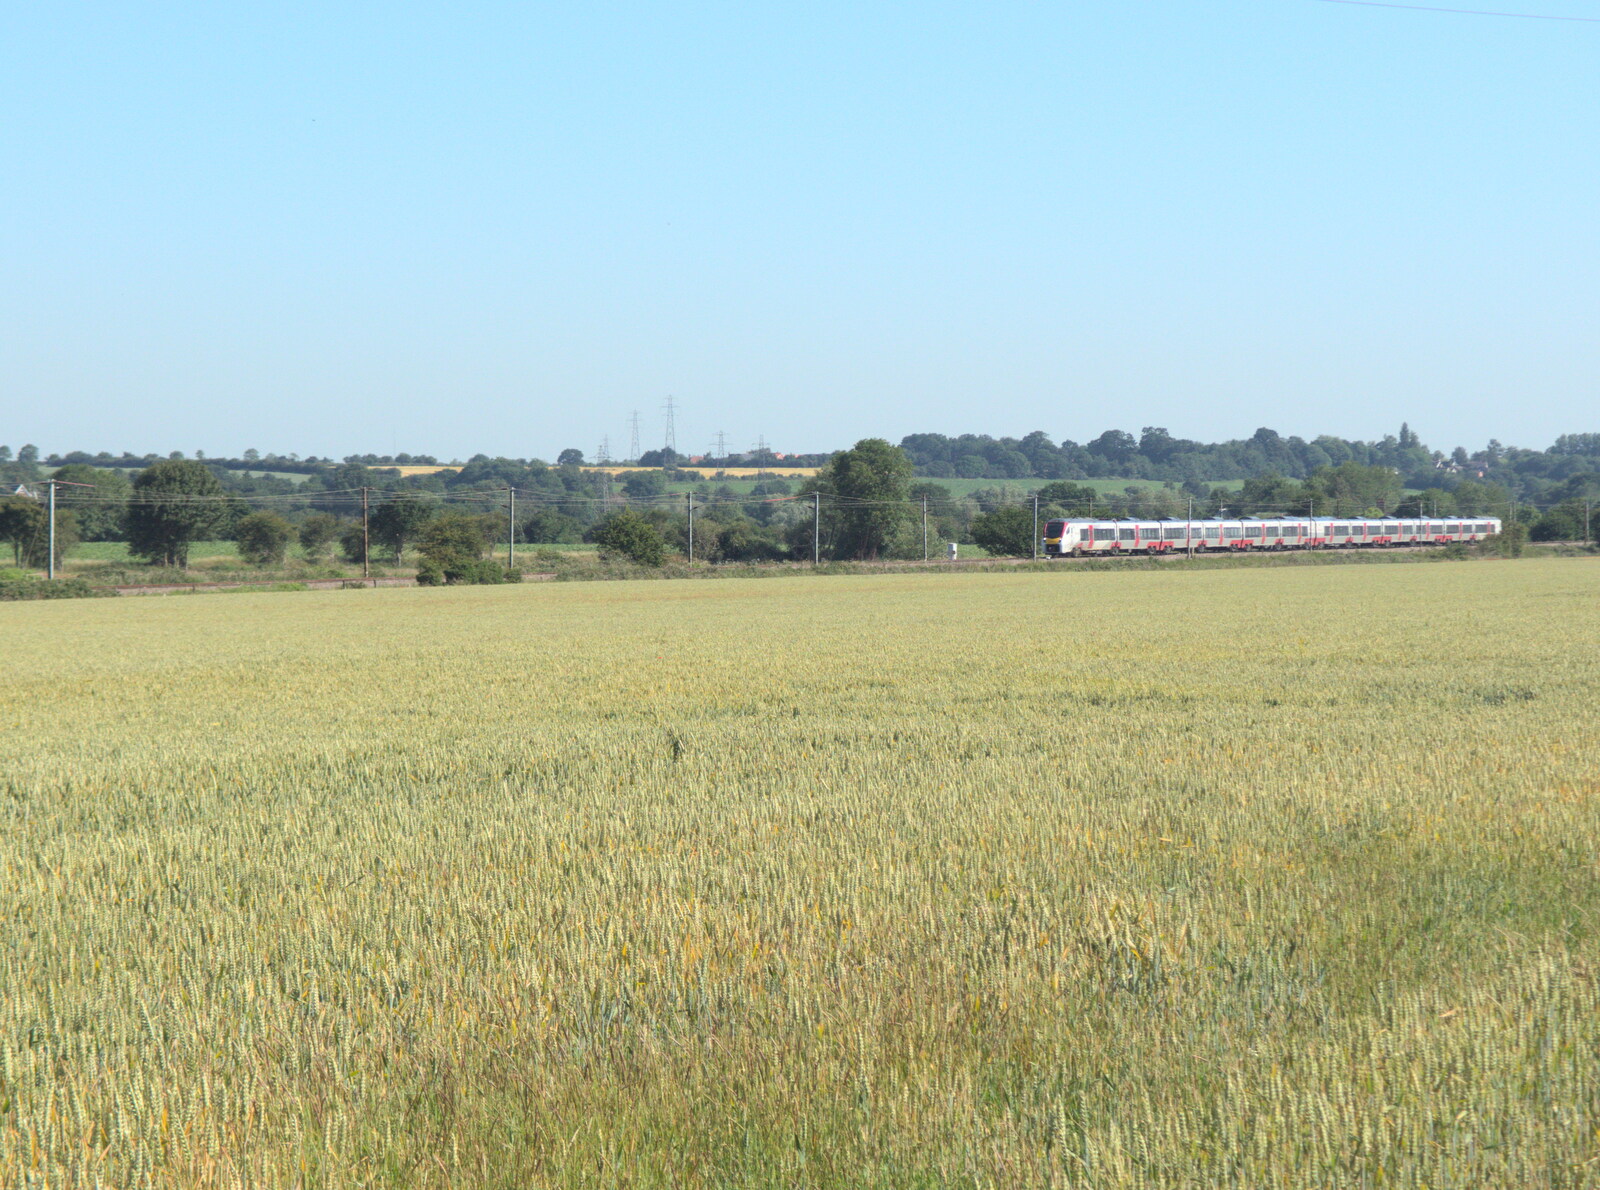 One of Greater Anglia's new trains  from Lockdown Bike Rides and an Anniversary Picnic, Mellis and Brome, Suffolk - 3rd July 2020